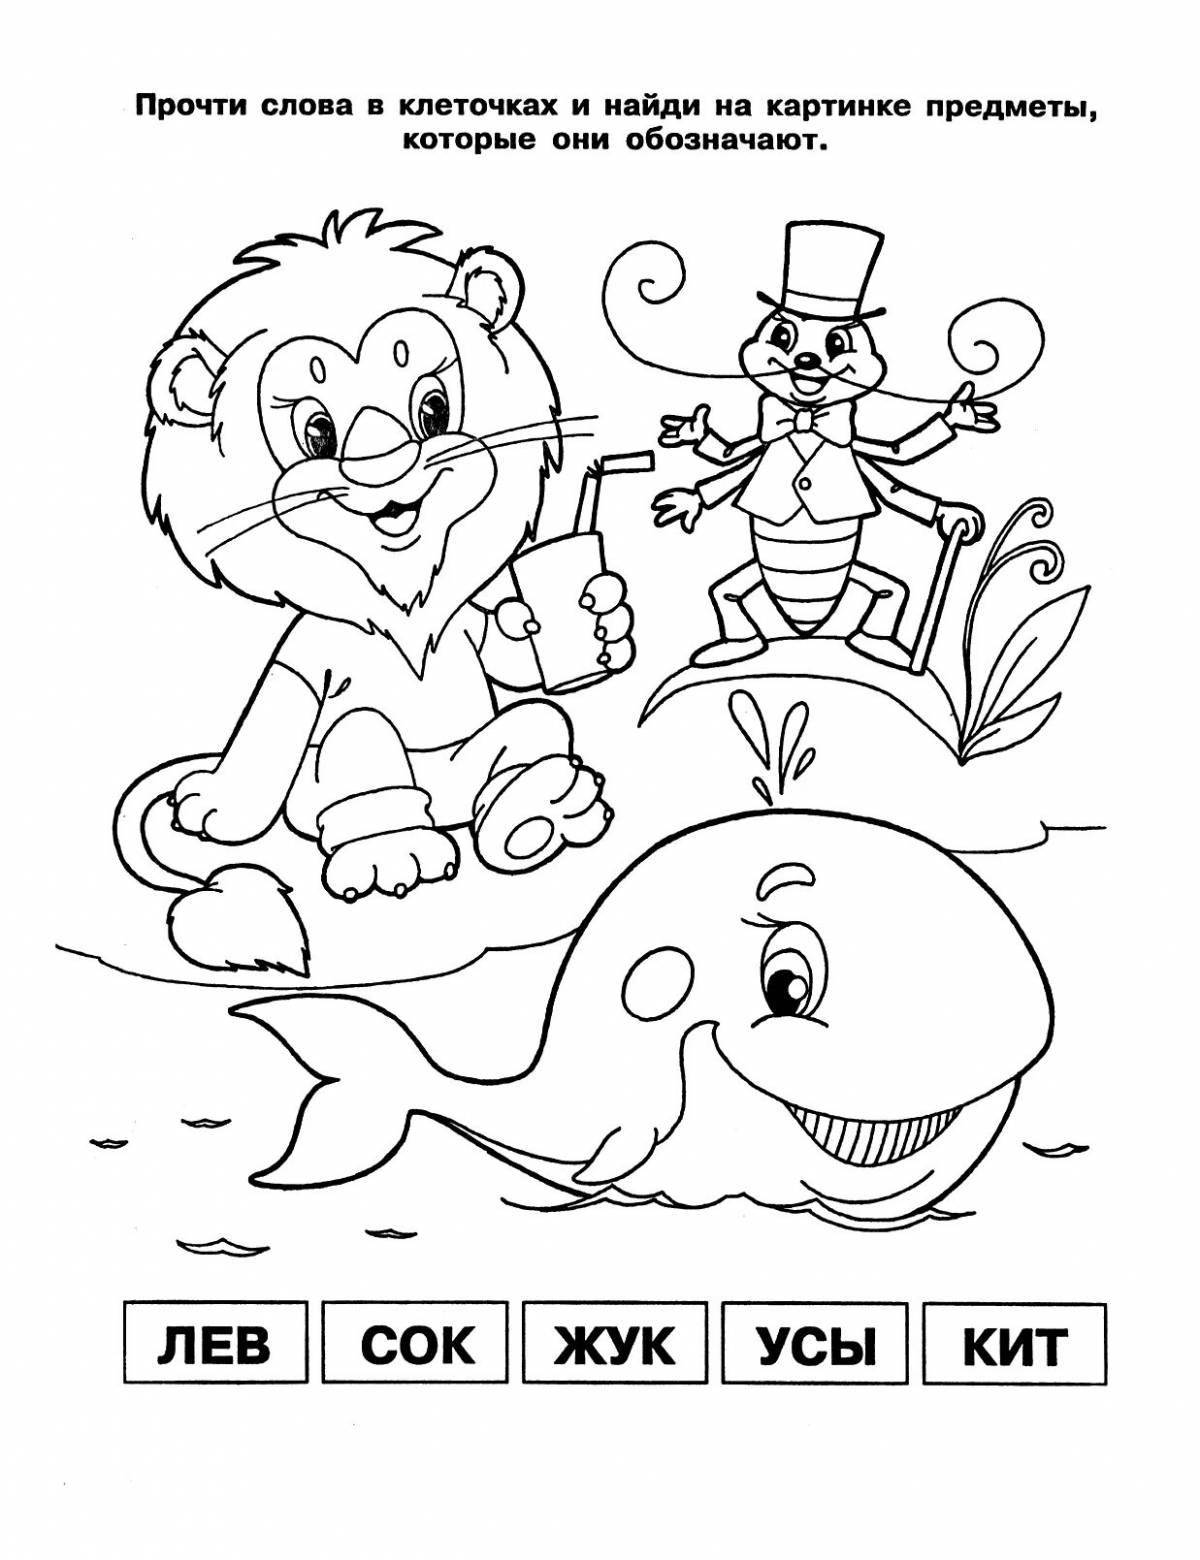 Educational coloring book reading